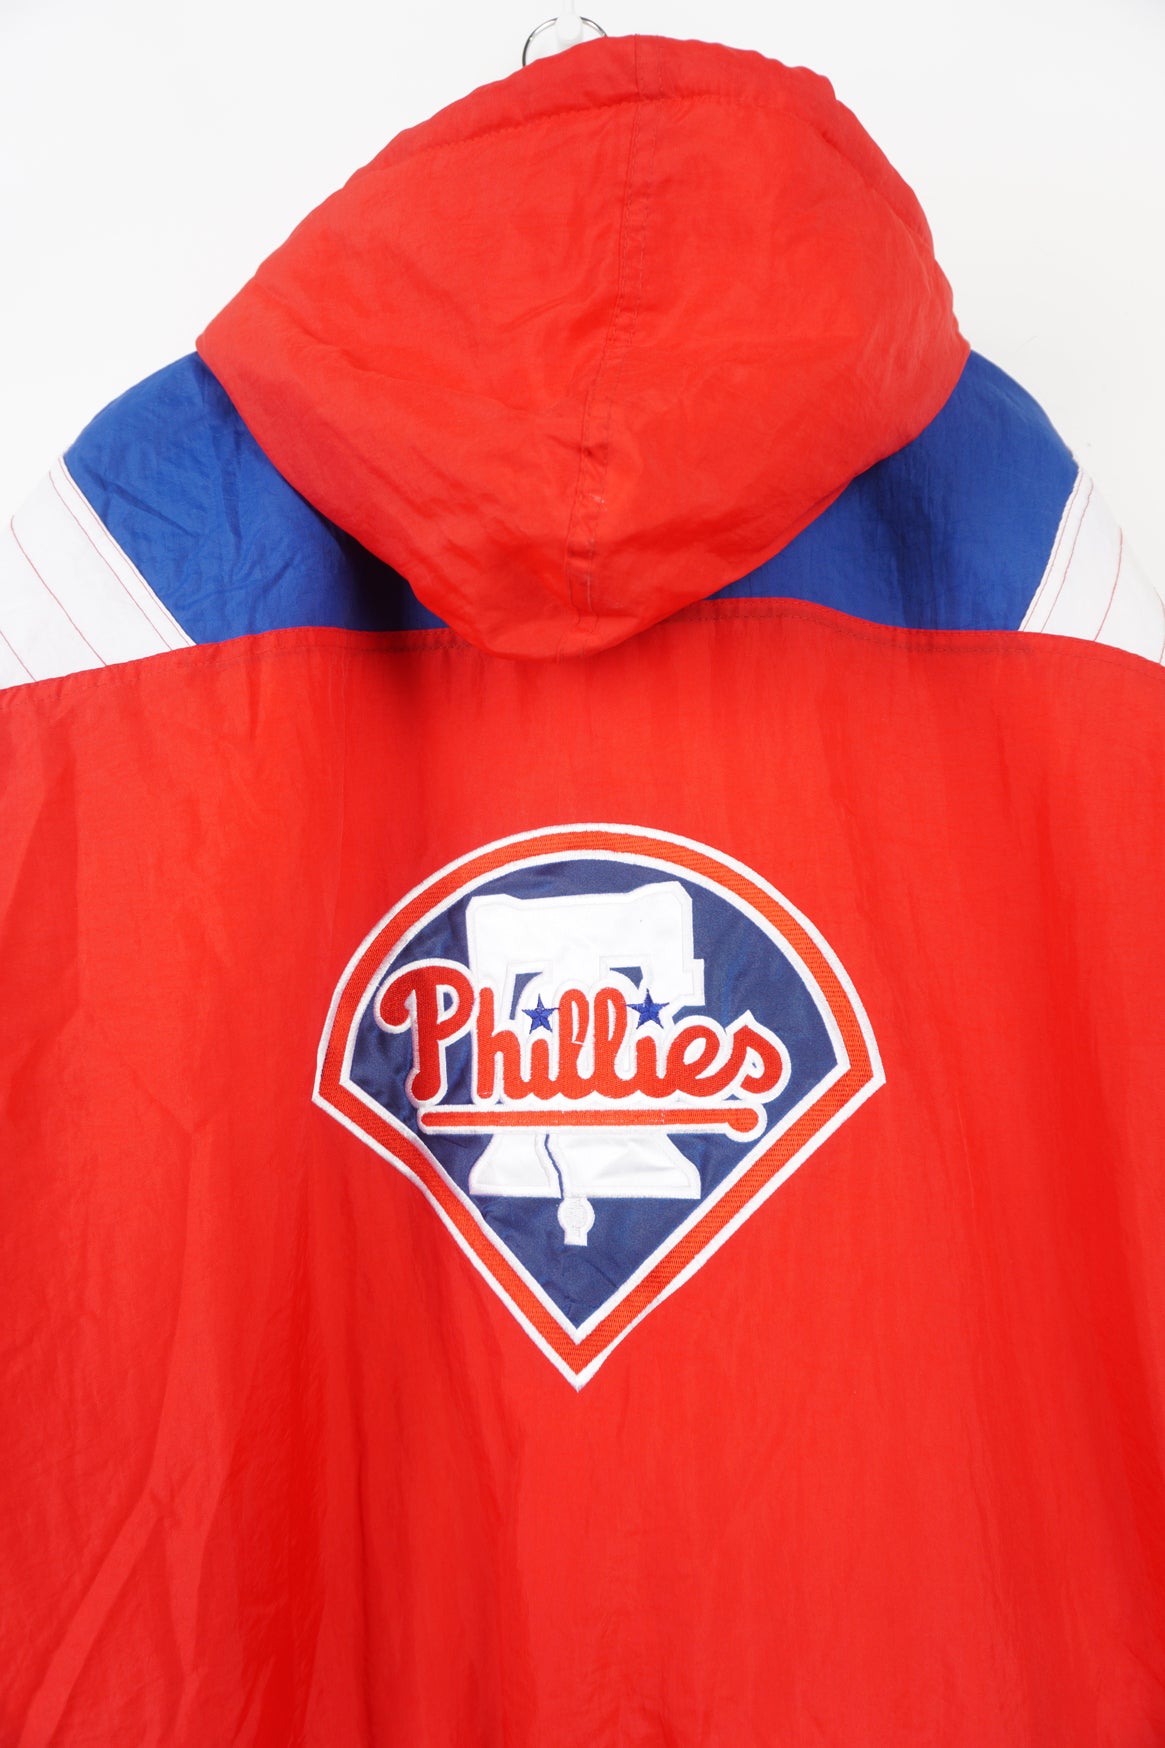 Philadelphia Phillies Warm Up Jacket STITCHES Size 2X Black Red Embroidered  MLB